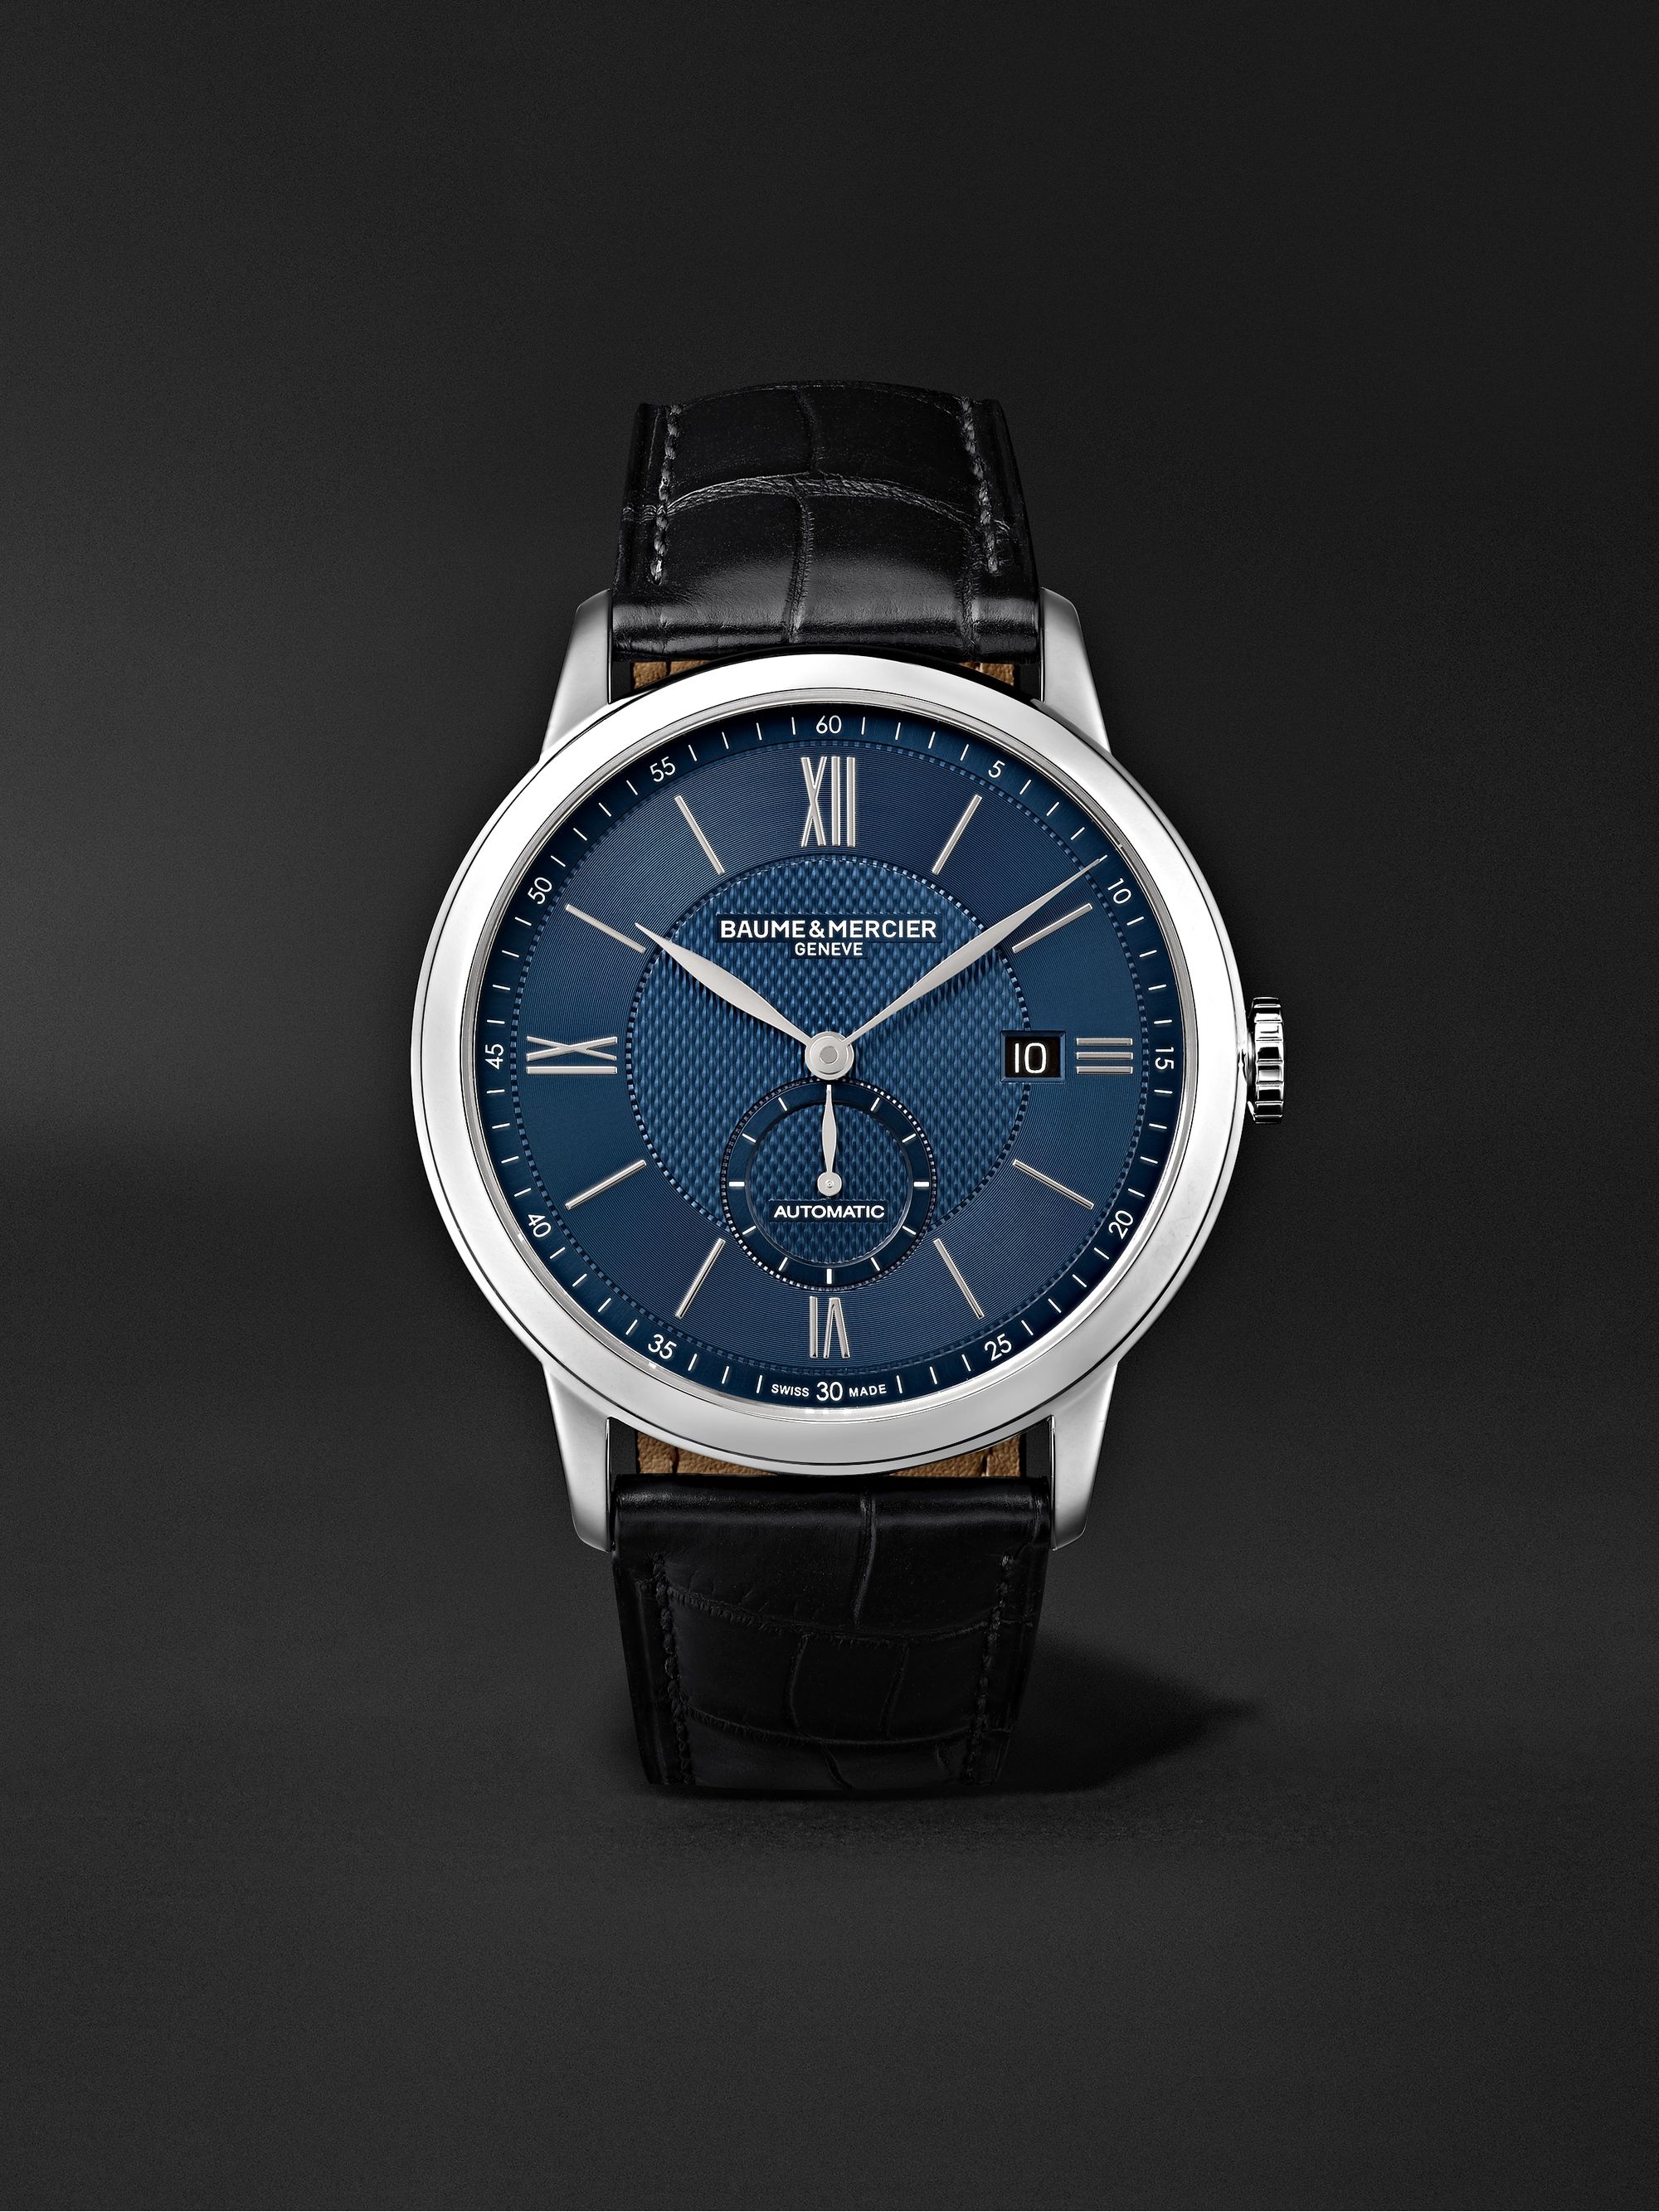 BAUME & MERCIER Classima Automatic 42mm Stainless Steel and Alligator Watch, Ref. No. 10480